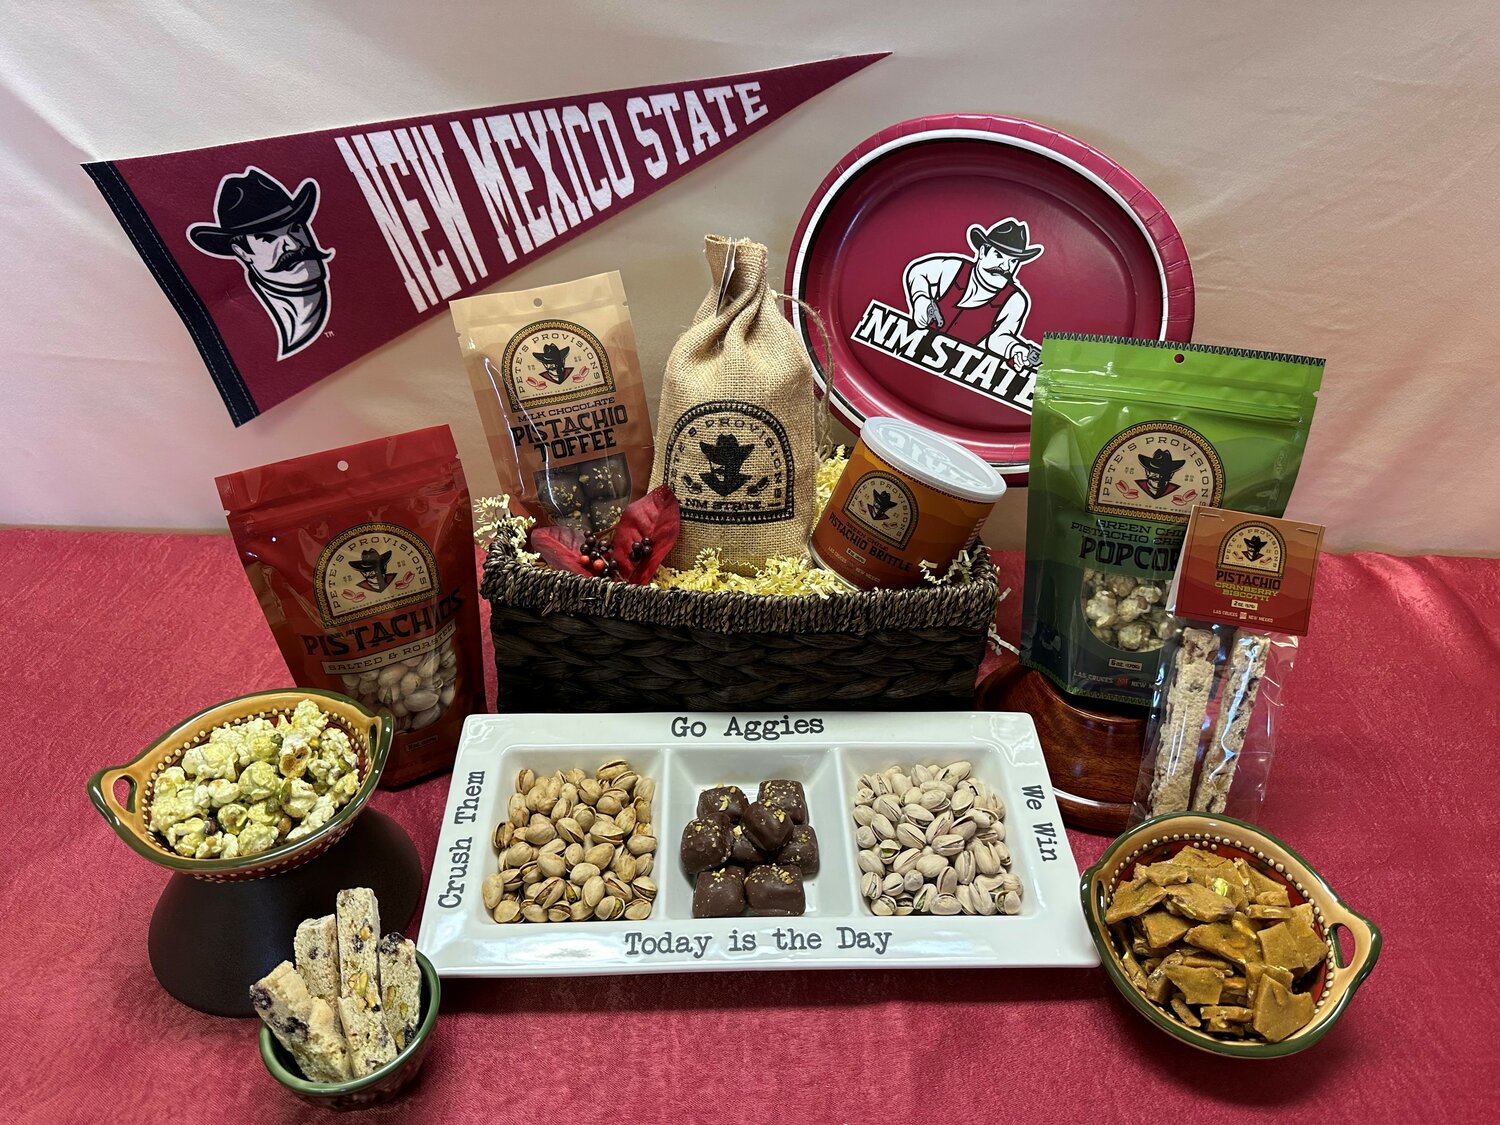 Heart of the Desert Pistachios & Wines is collaborating with New Mexico State Athletics for the first time to create a mix of farm fresh New Mexico pistachios named "Pete's Provisions."